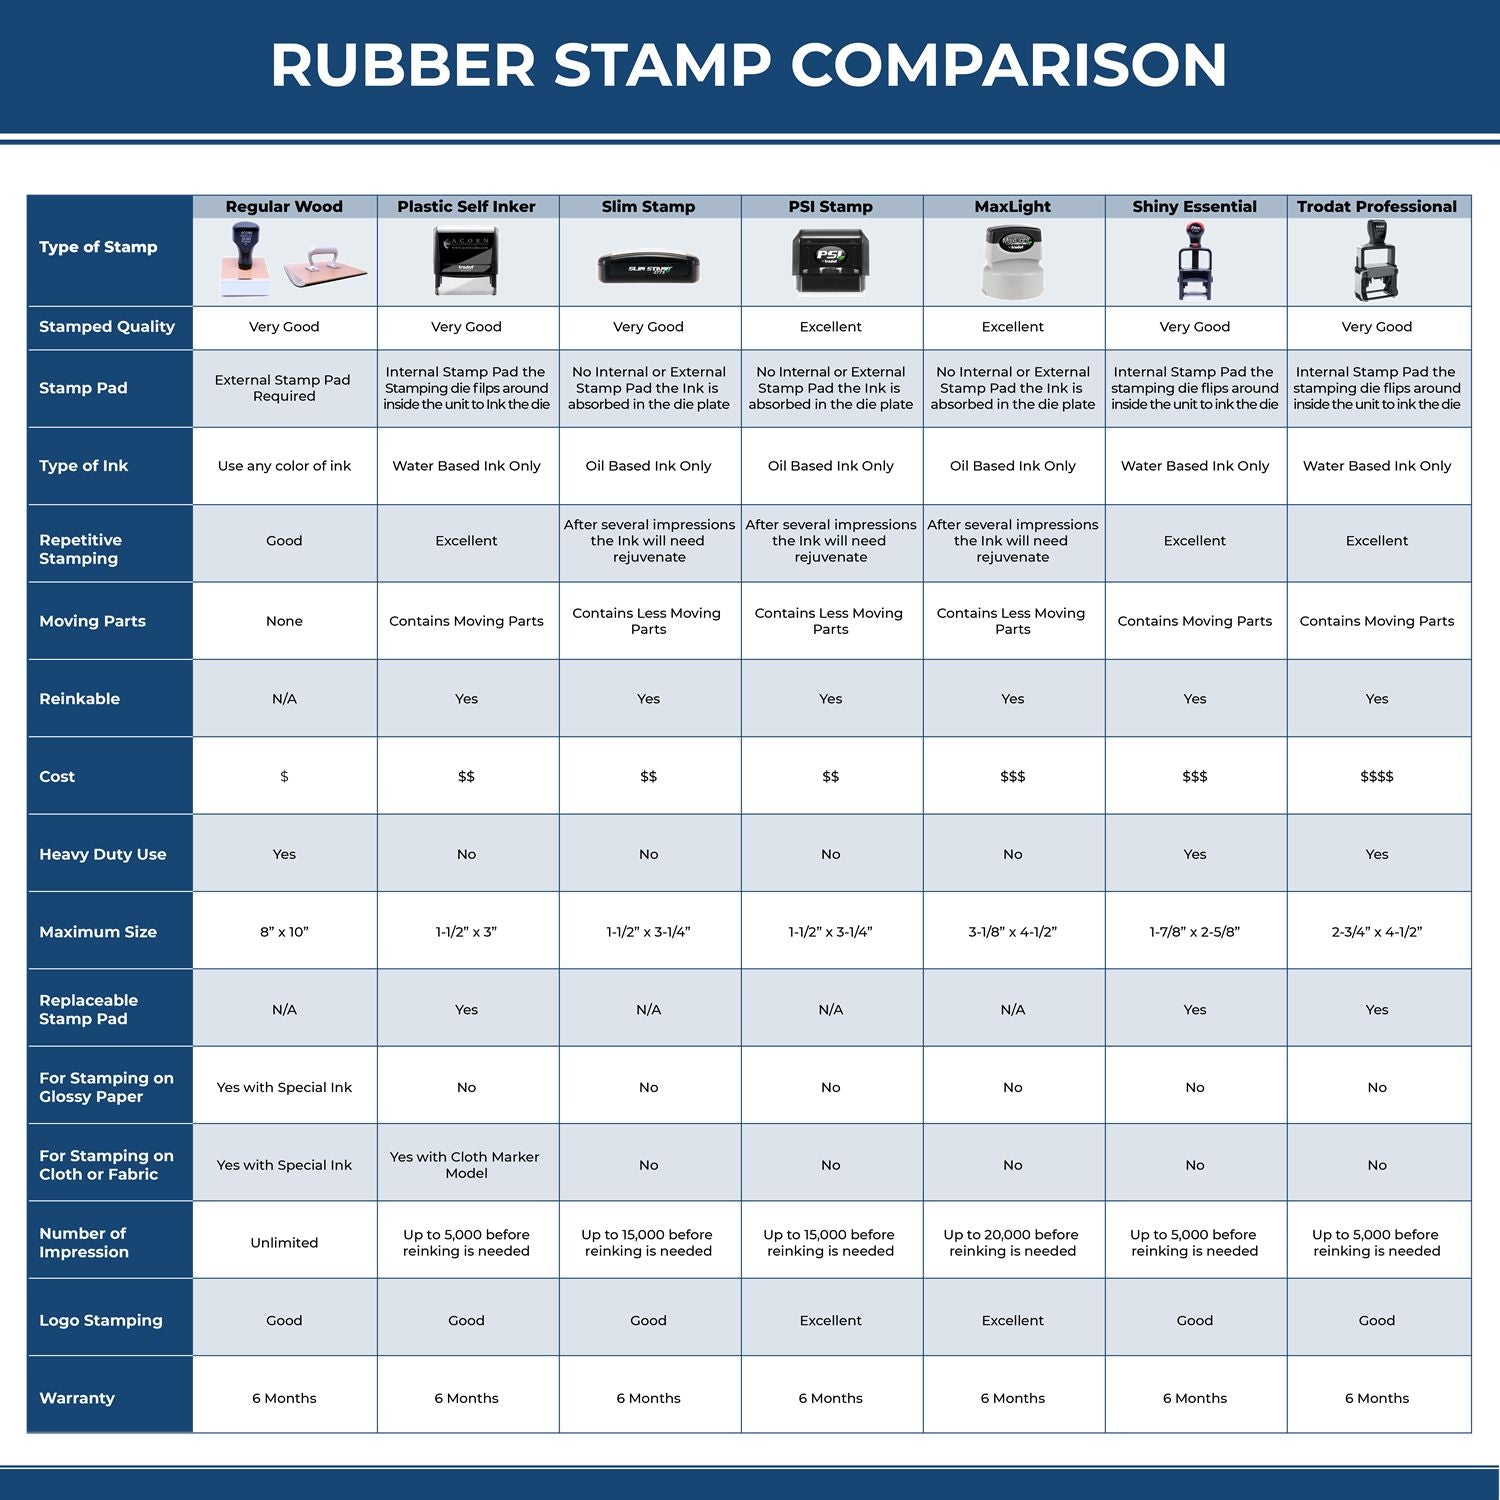 A comparison chart for the different types of mount models available for the Self-Inking South Dakota PE Stamp.